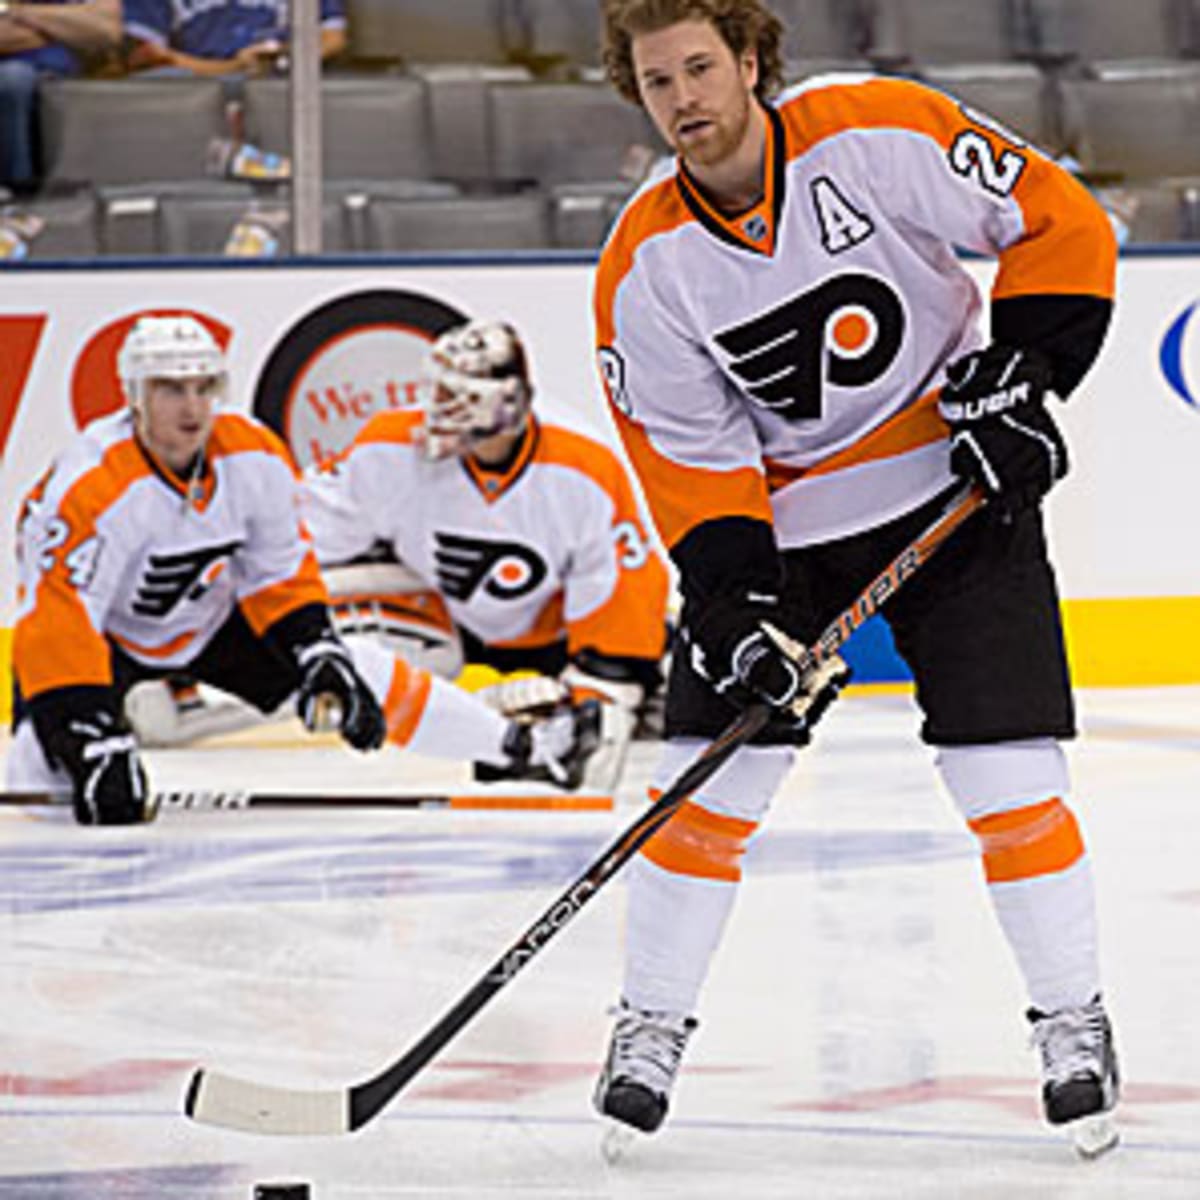 NHL suspends Flyers' Giroux for Game 5 